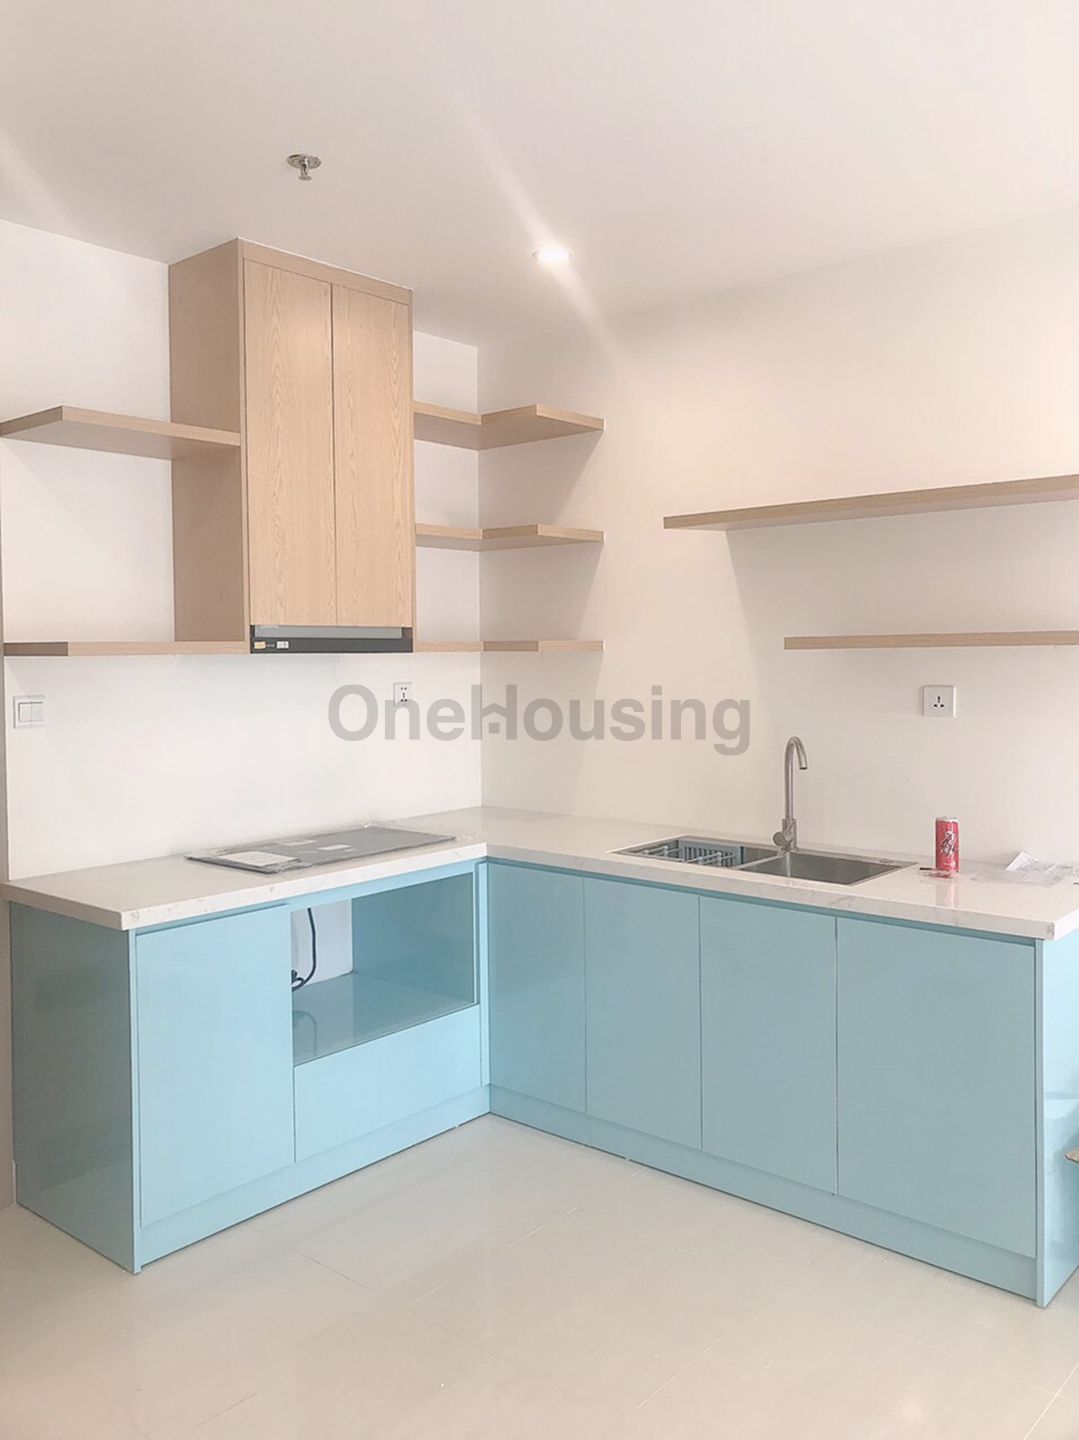 Onehousing image